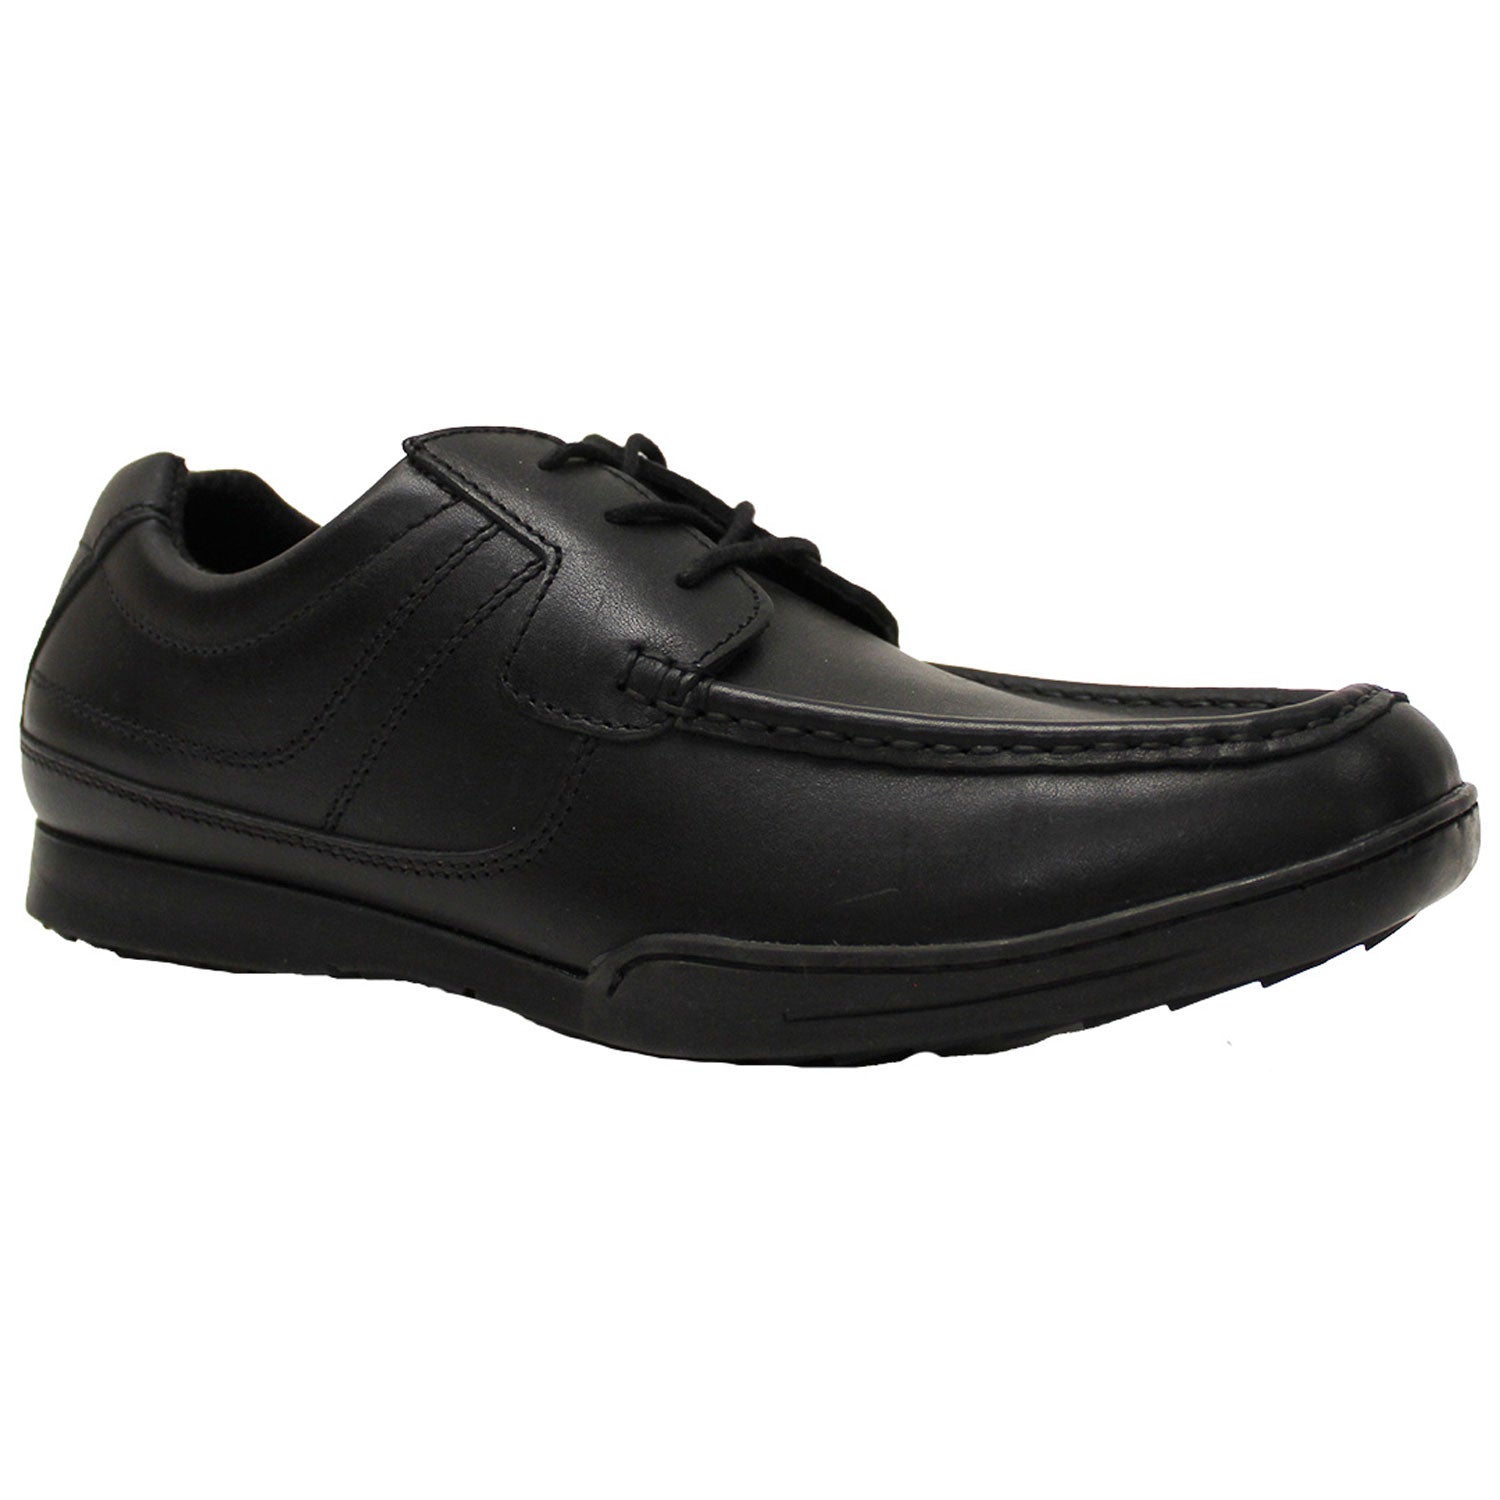 Ninety 78 Lace Up School Shoe - Black 1 Shaws Department Stores